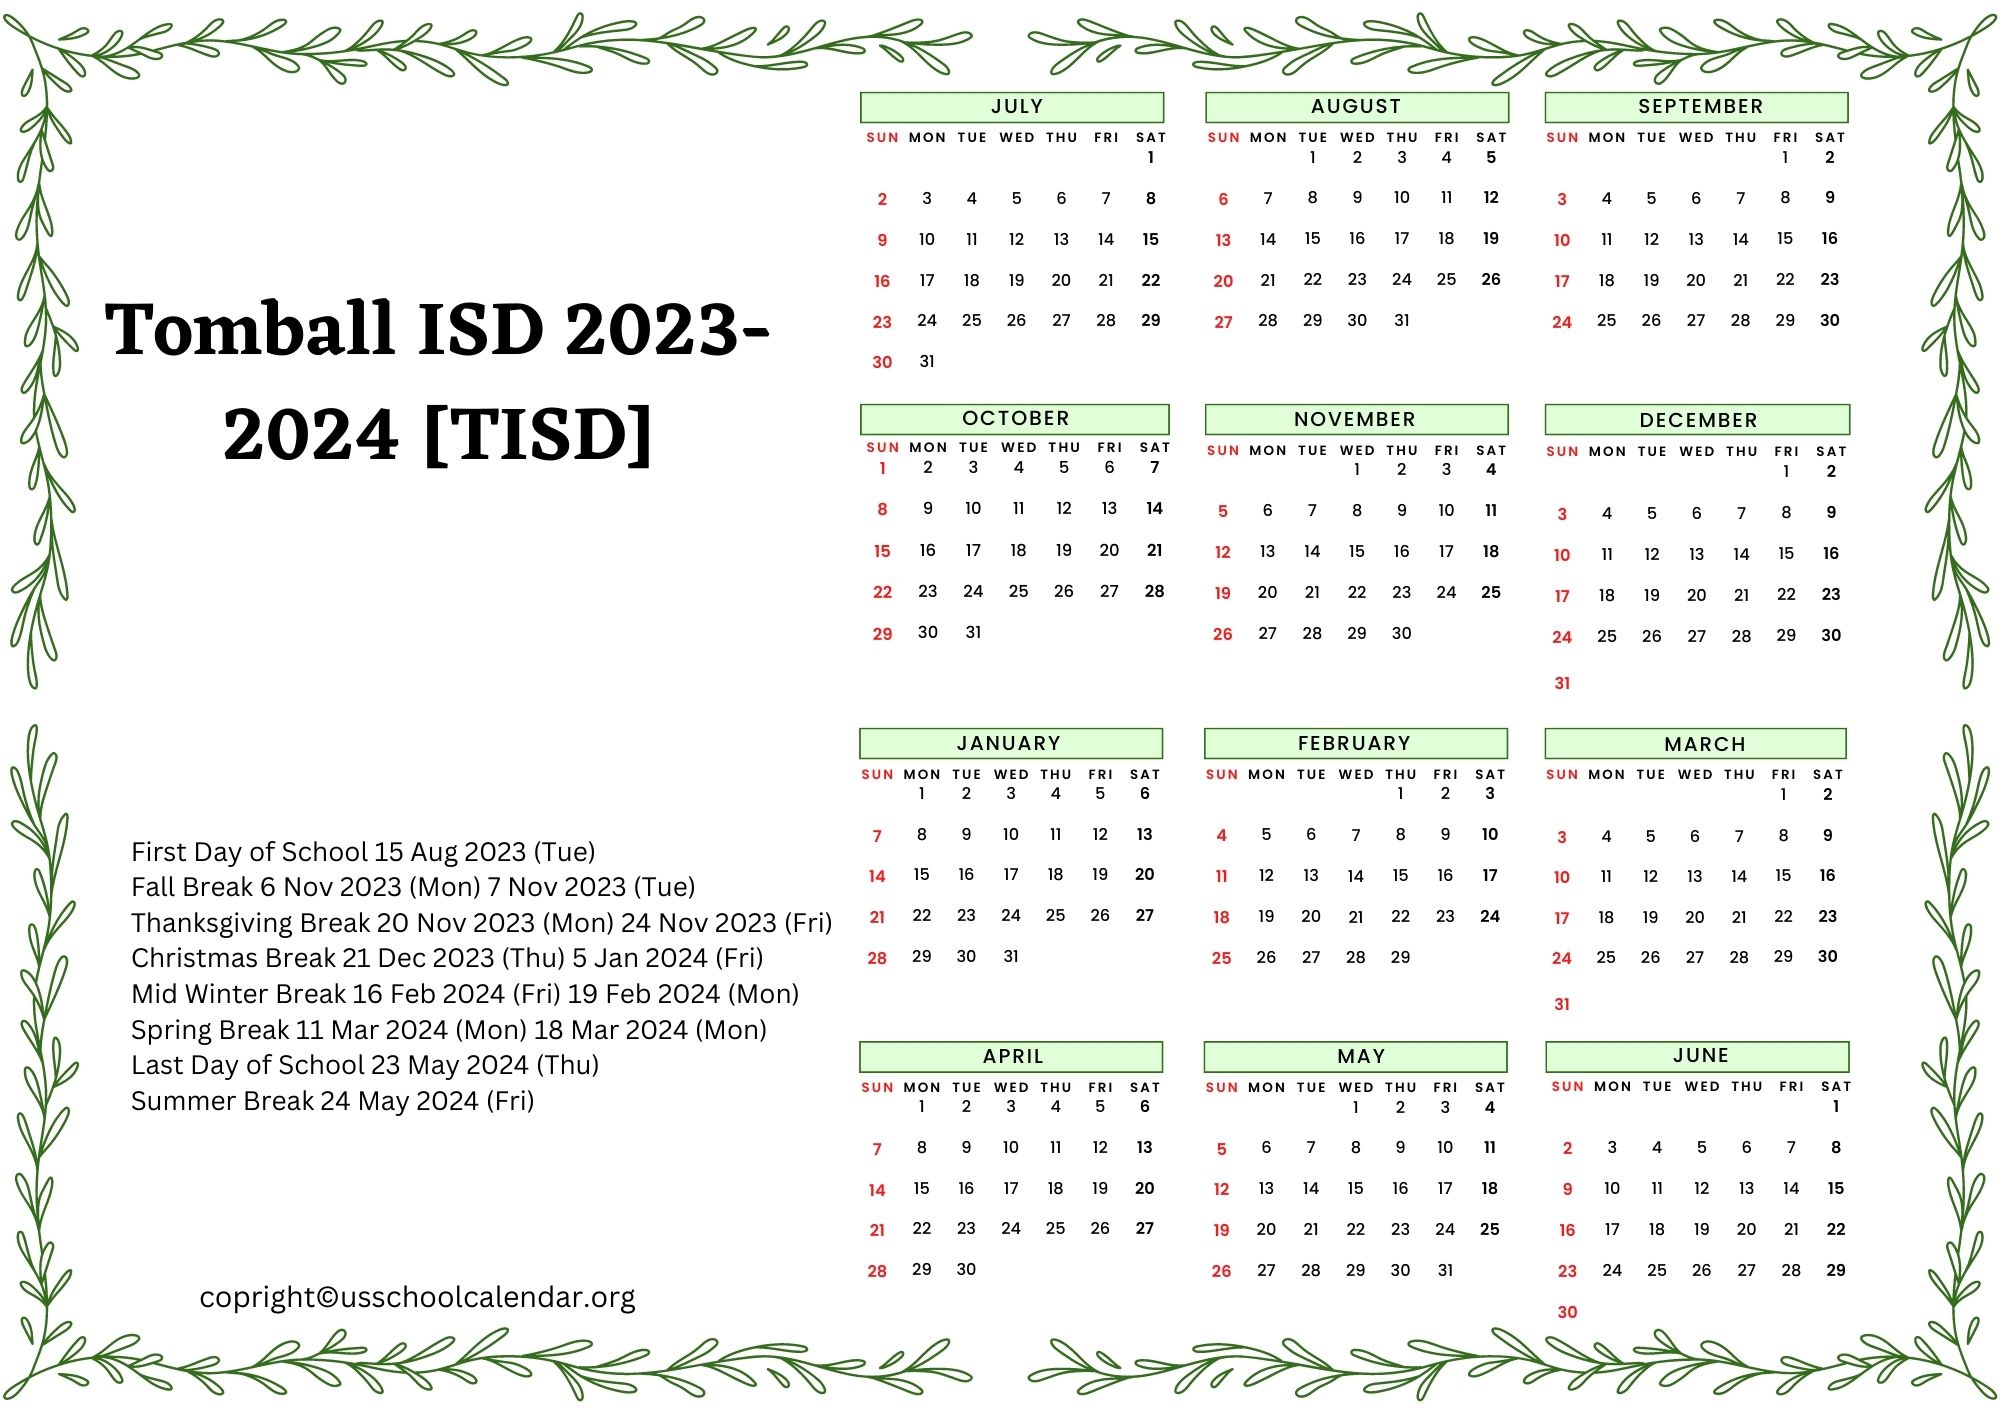 Tomball ISD Calendar with Holidays 2023-2024 [TISD]